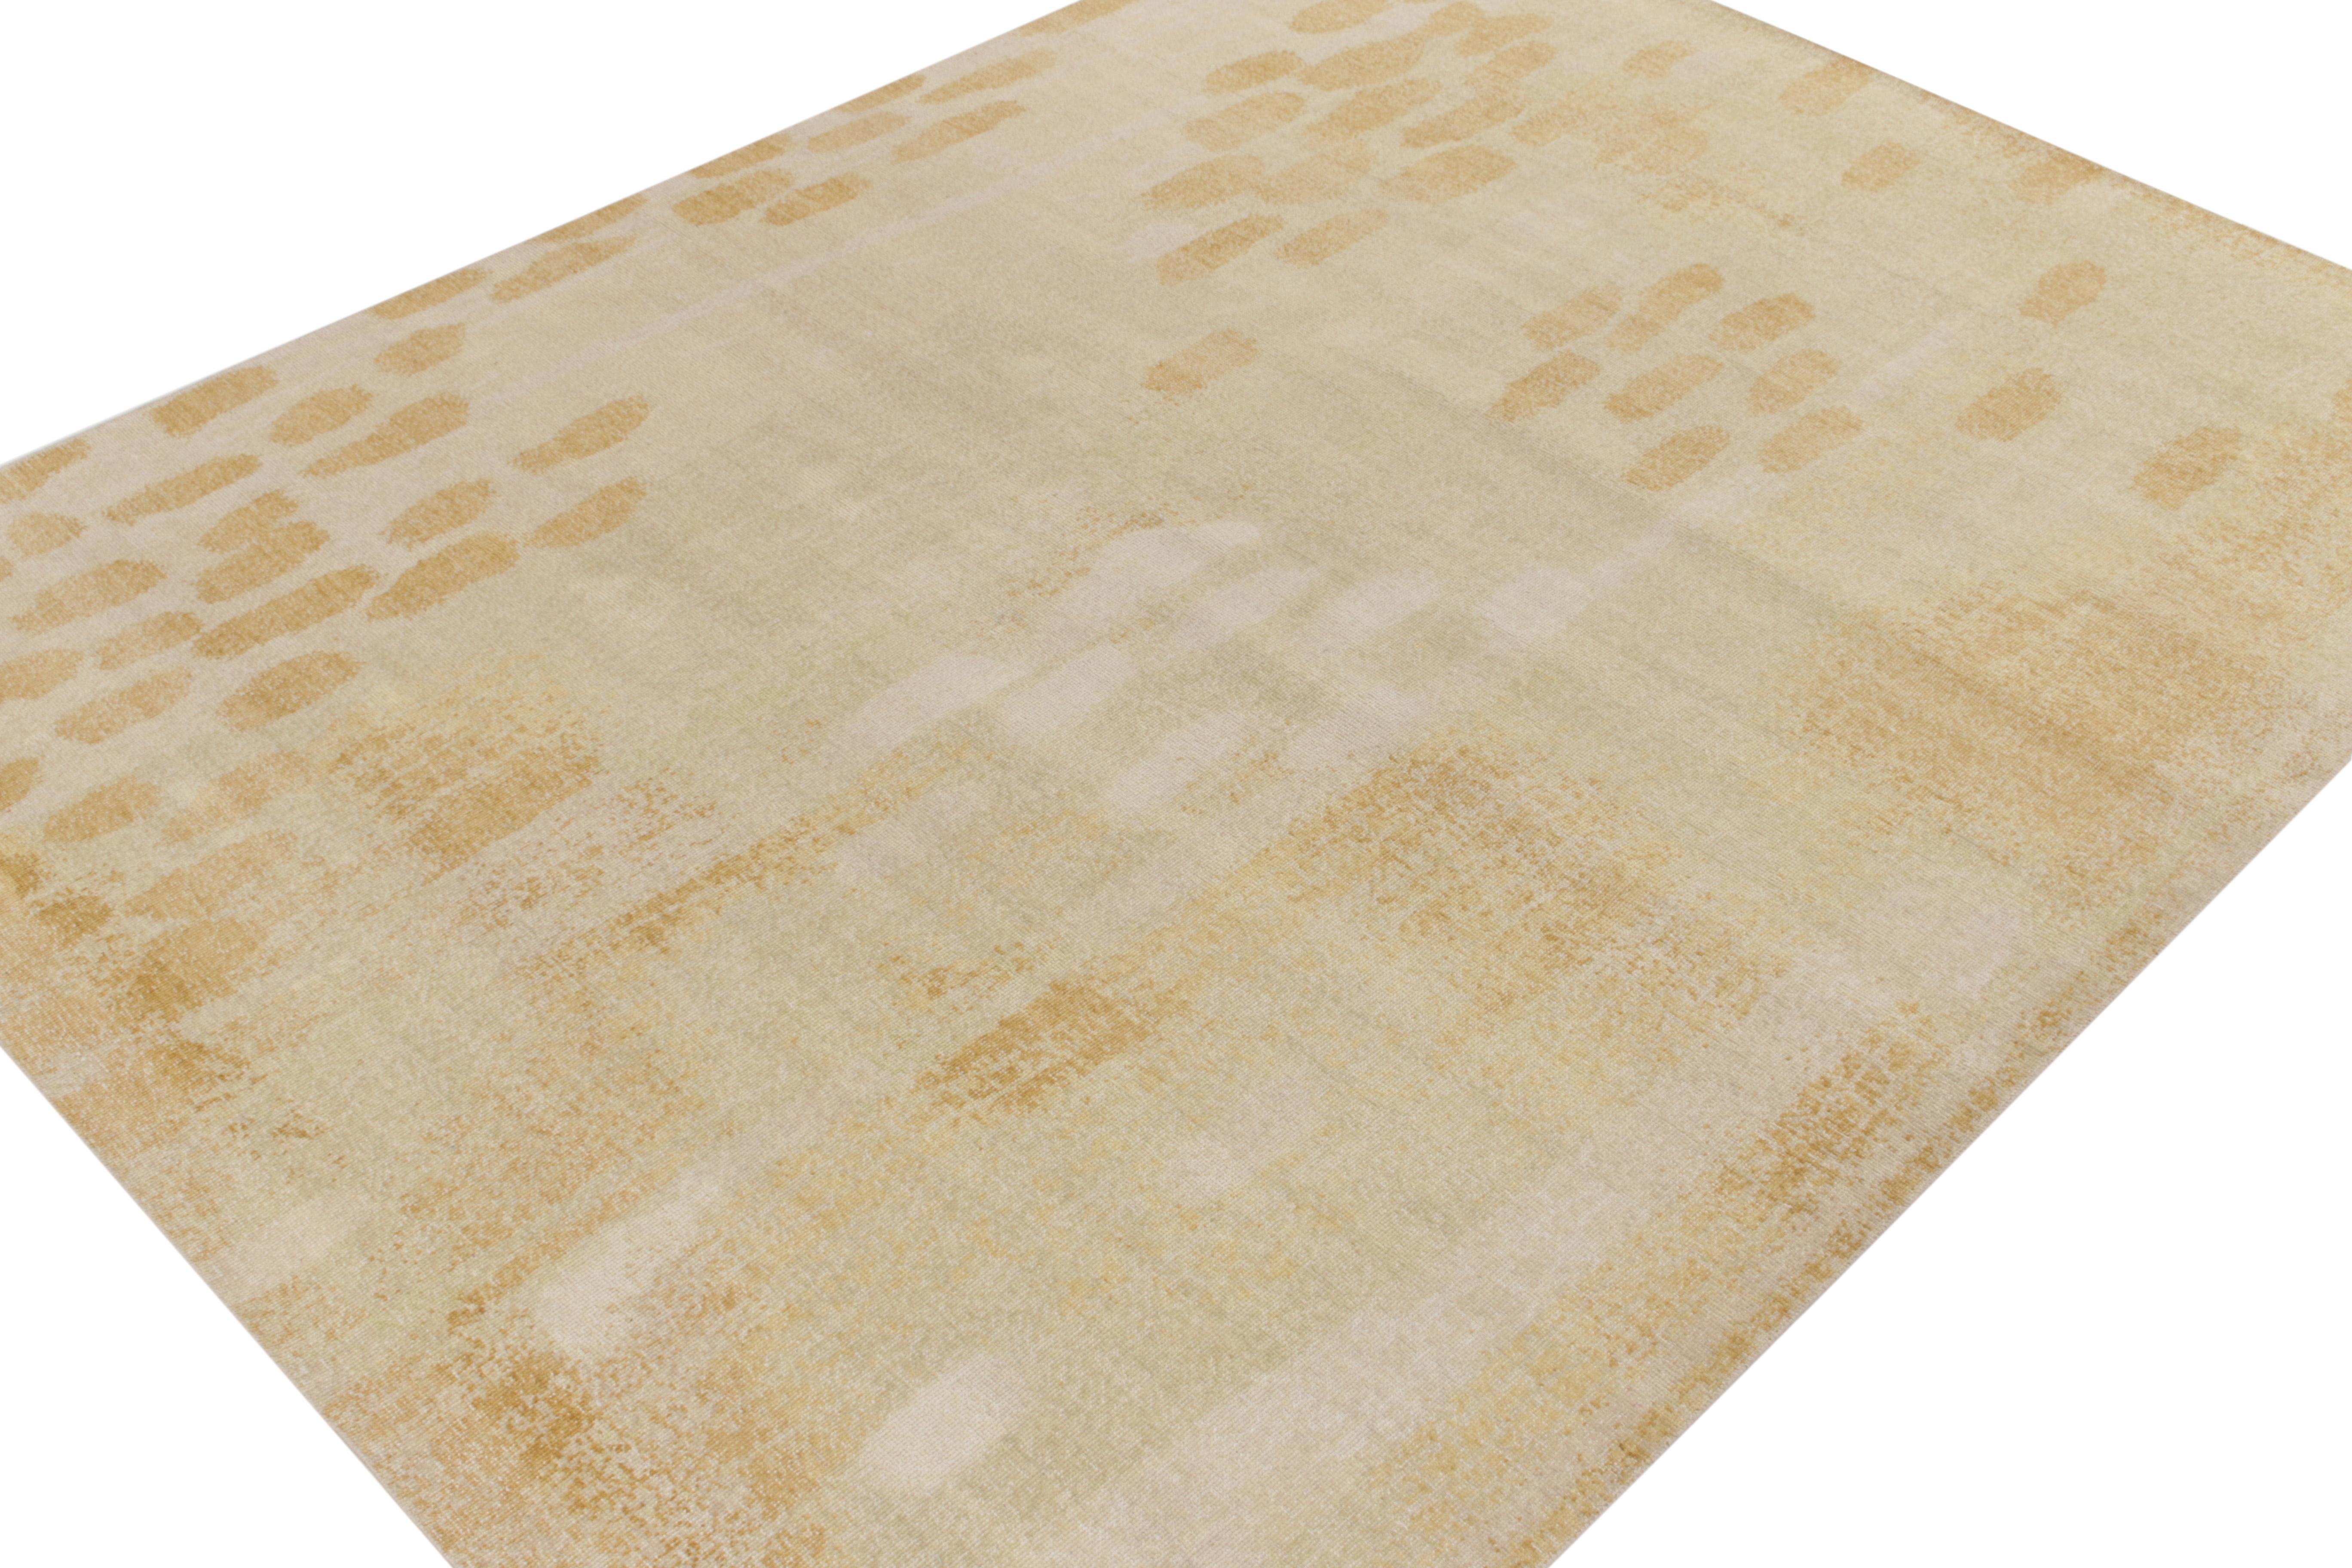 Indian Rug & Kilim's Distressed Style Modern Rug in Cream, Gold, White Dots Pattern For Sale